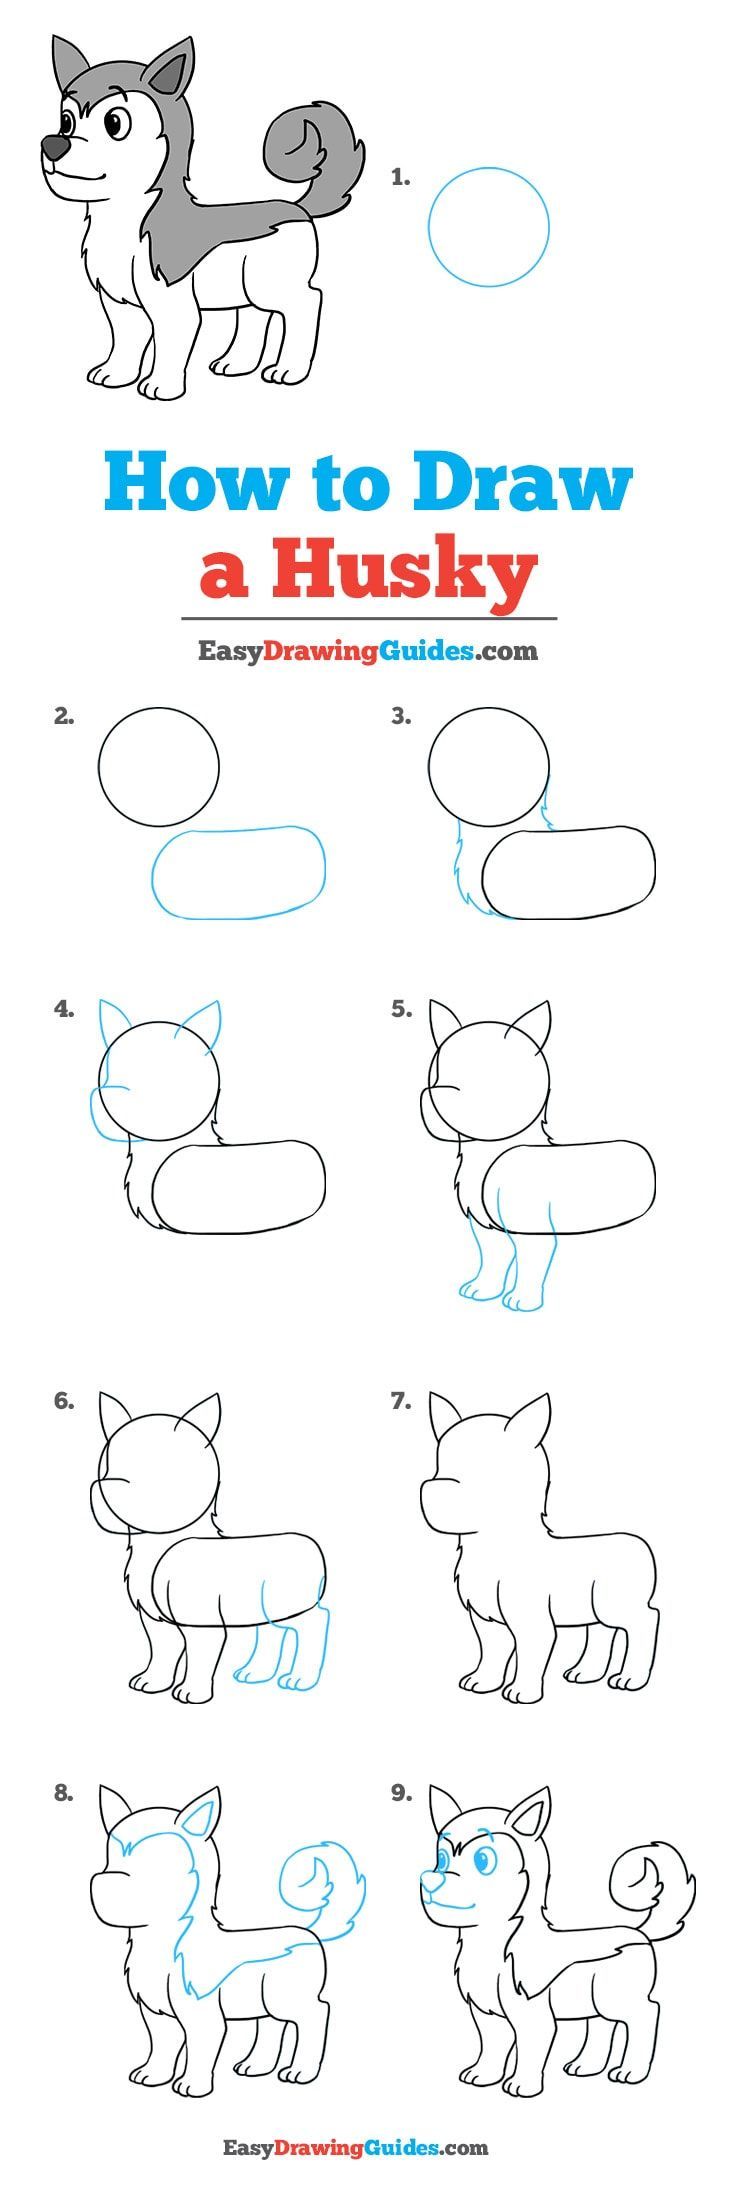 How To Draw A Husky - Really Easy Drawing Tutorial